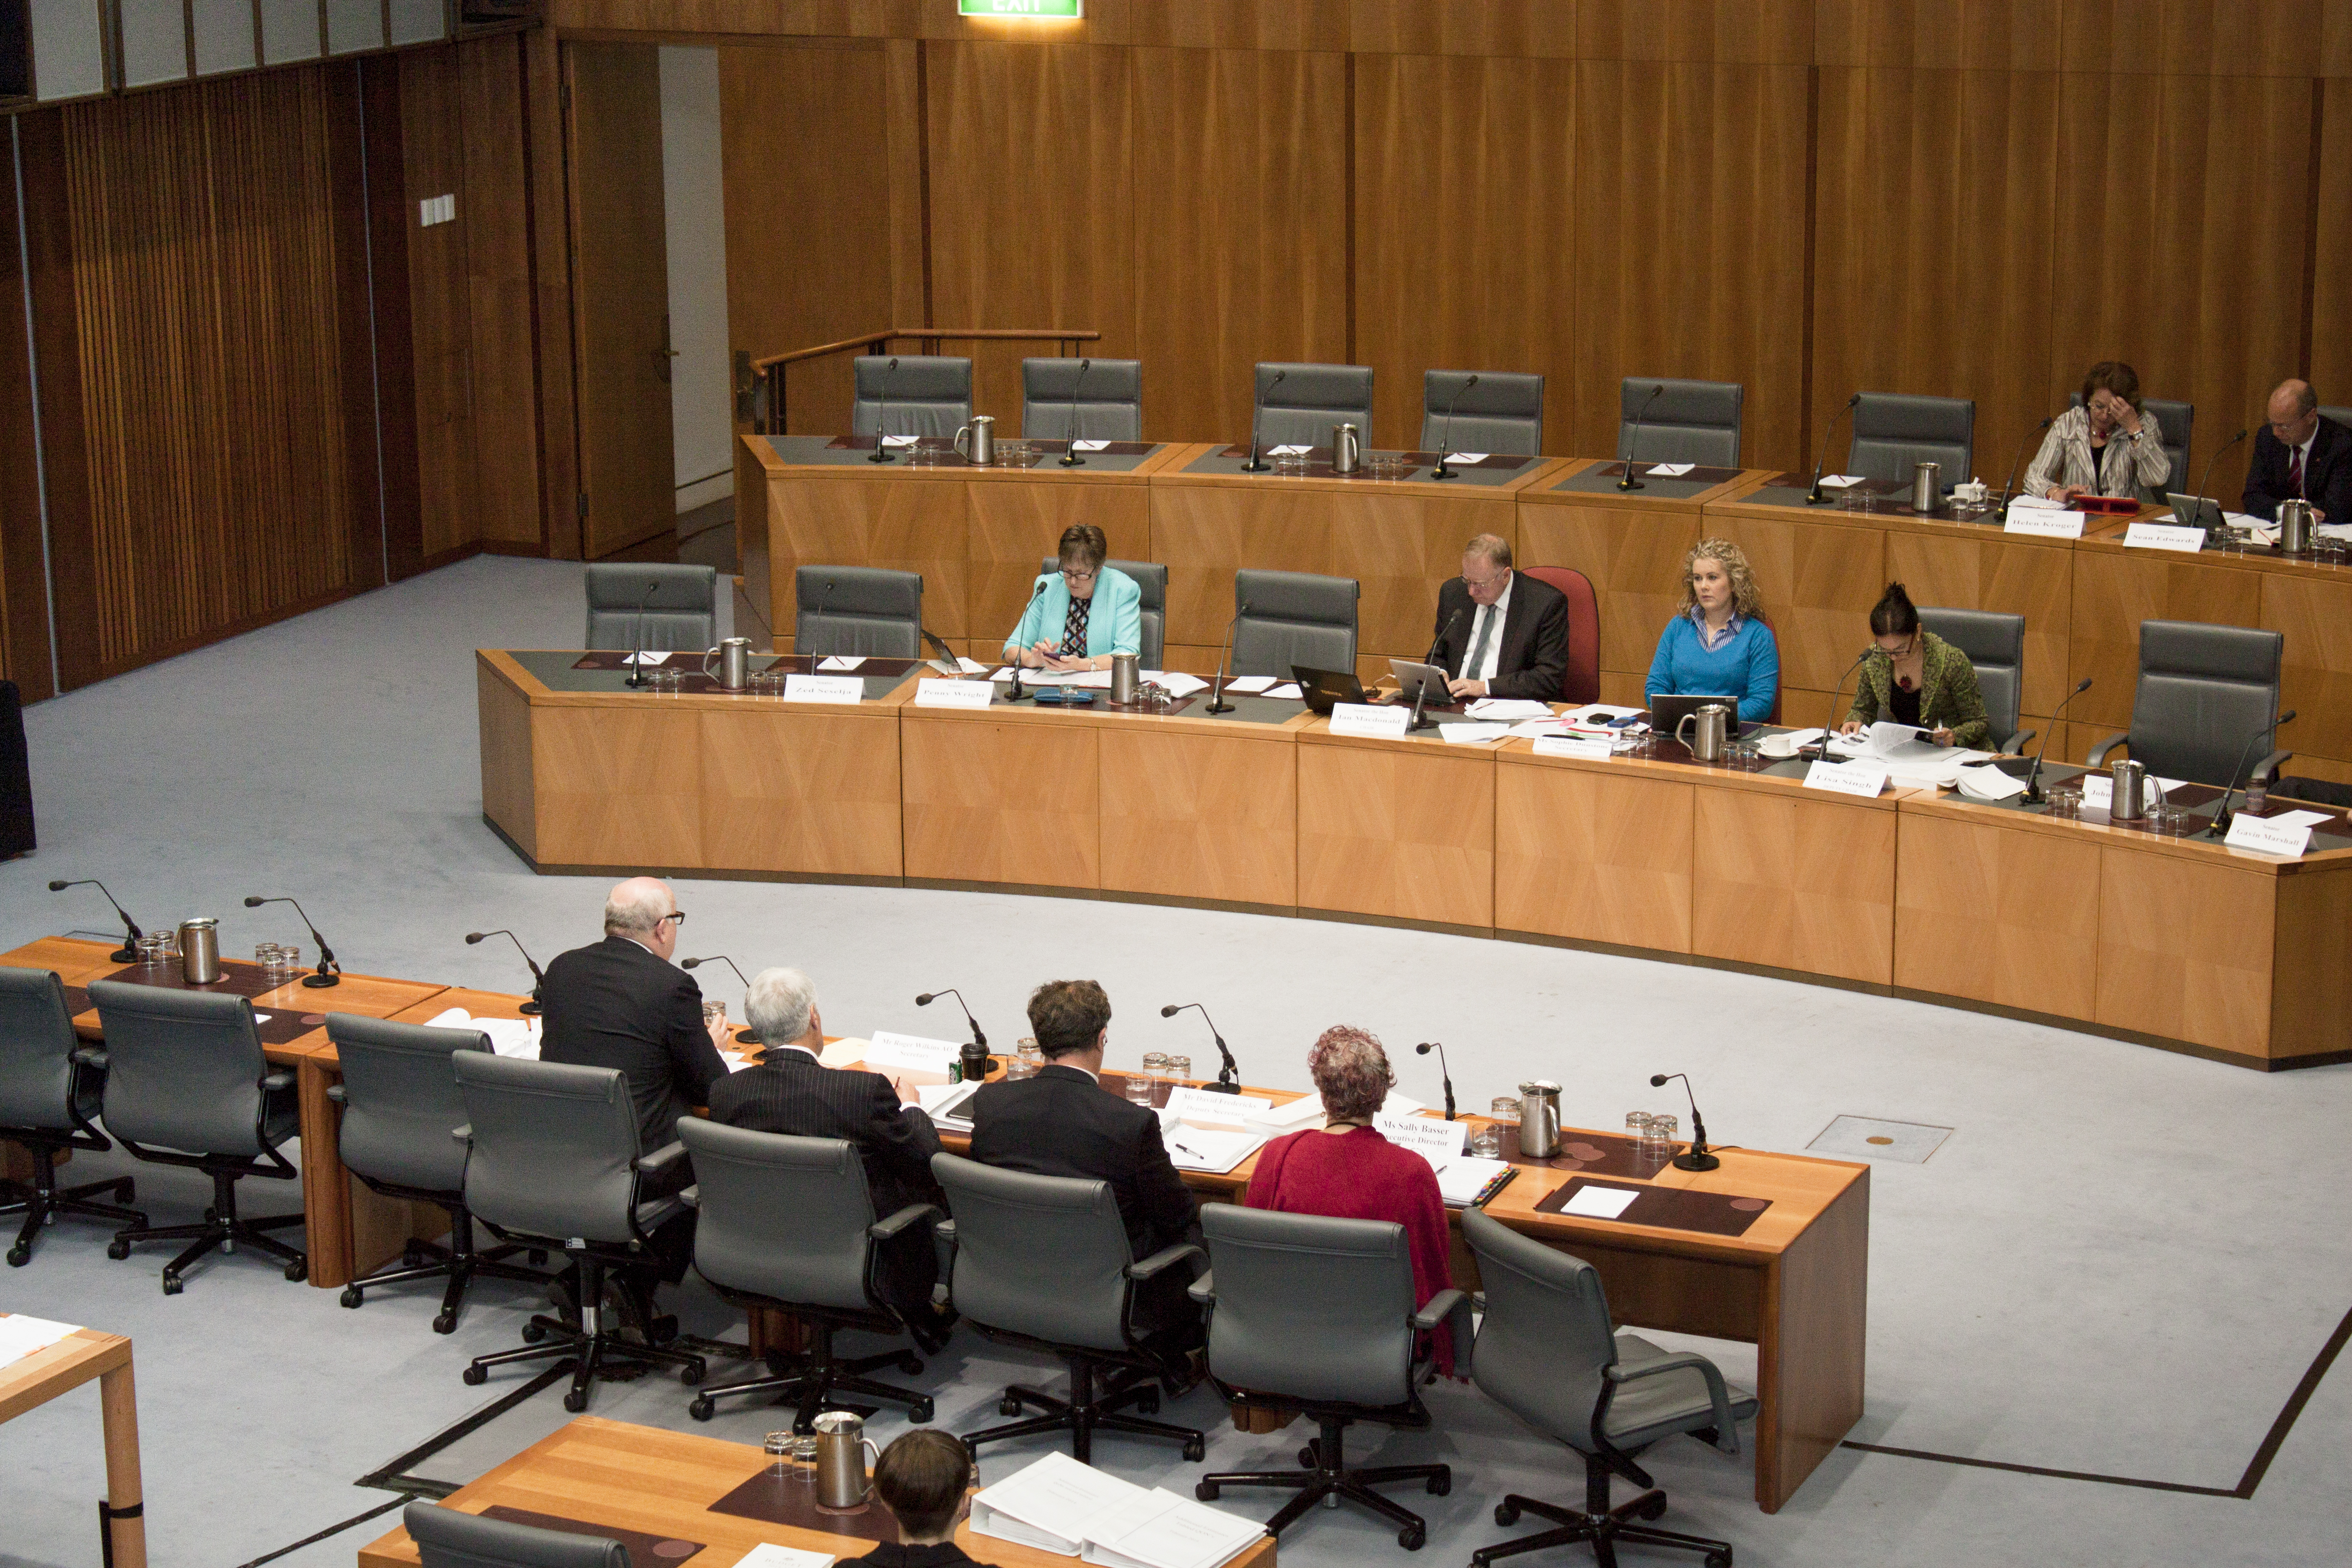 Committee members questioning Senator the Hon George Brandis, Attorney-General and Minister for the Arts, and departmental officers, 28 May 2014. Seated in top row L-R: Senators Helen Kroger and Sean Edwards. Seated in bottom row facing camera L-R: Senators Penny Wright and Ian Macdonald [Chair], Sophie Dunstone [Secretary] and Senator Lisa Singh [Deputy Chair].